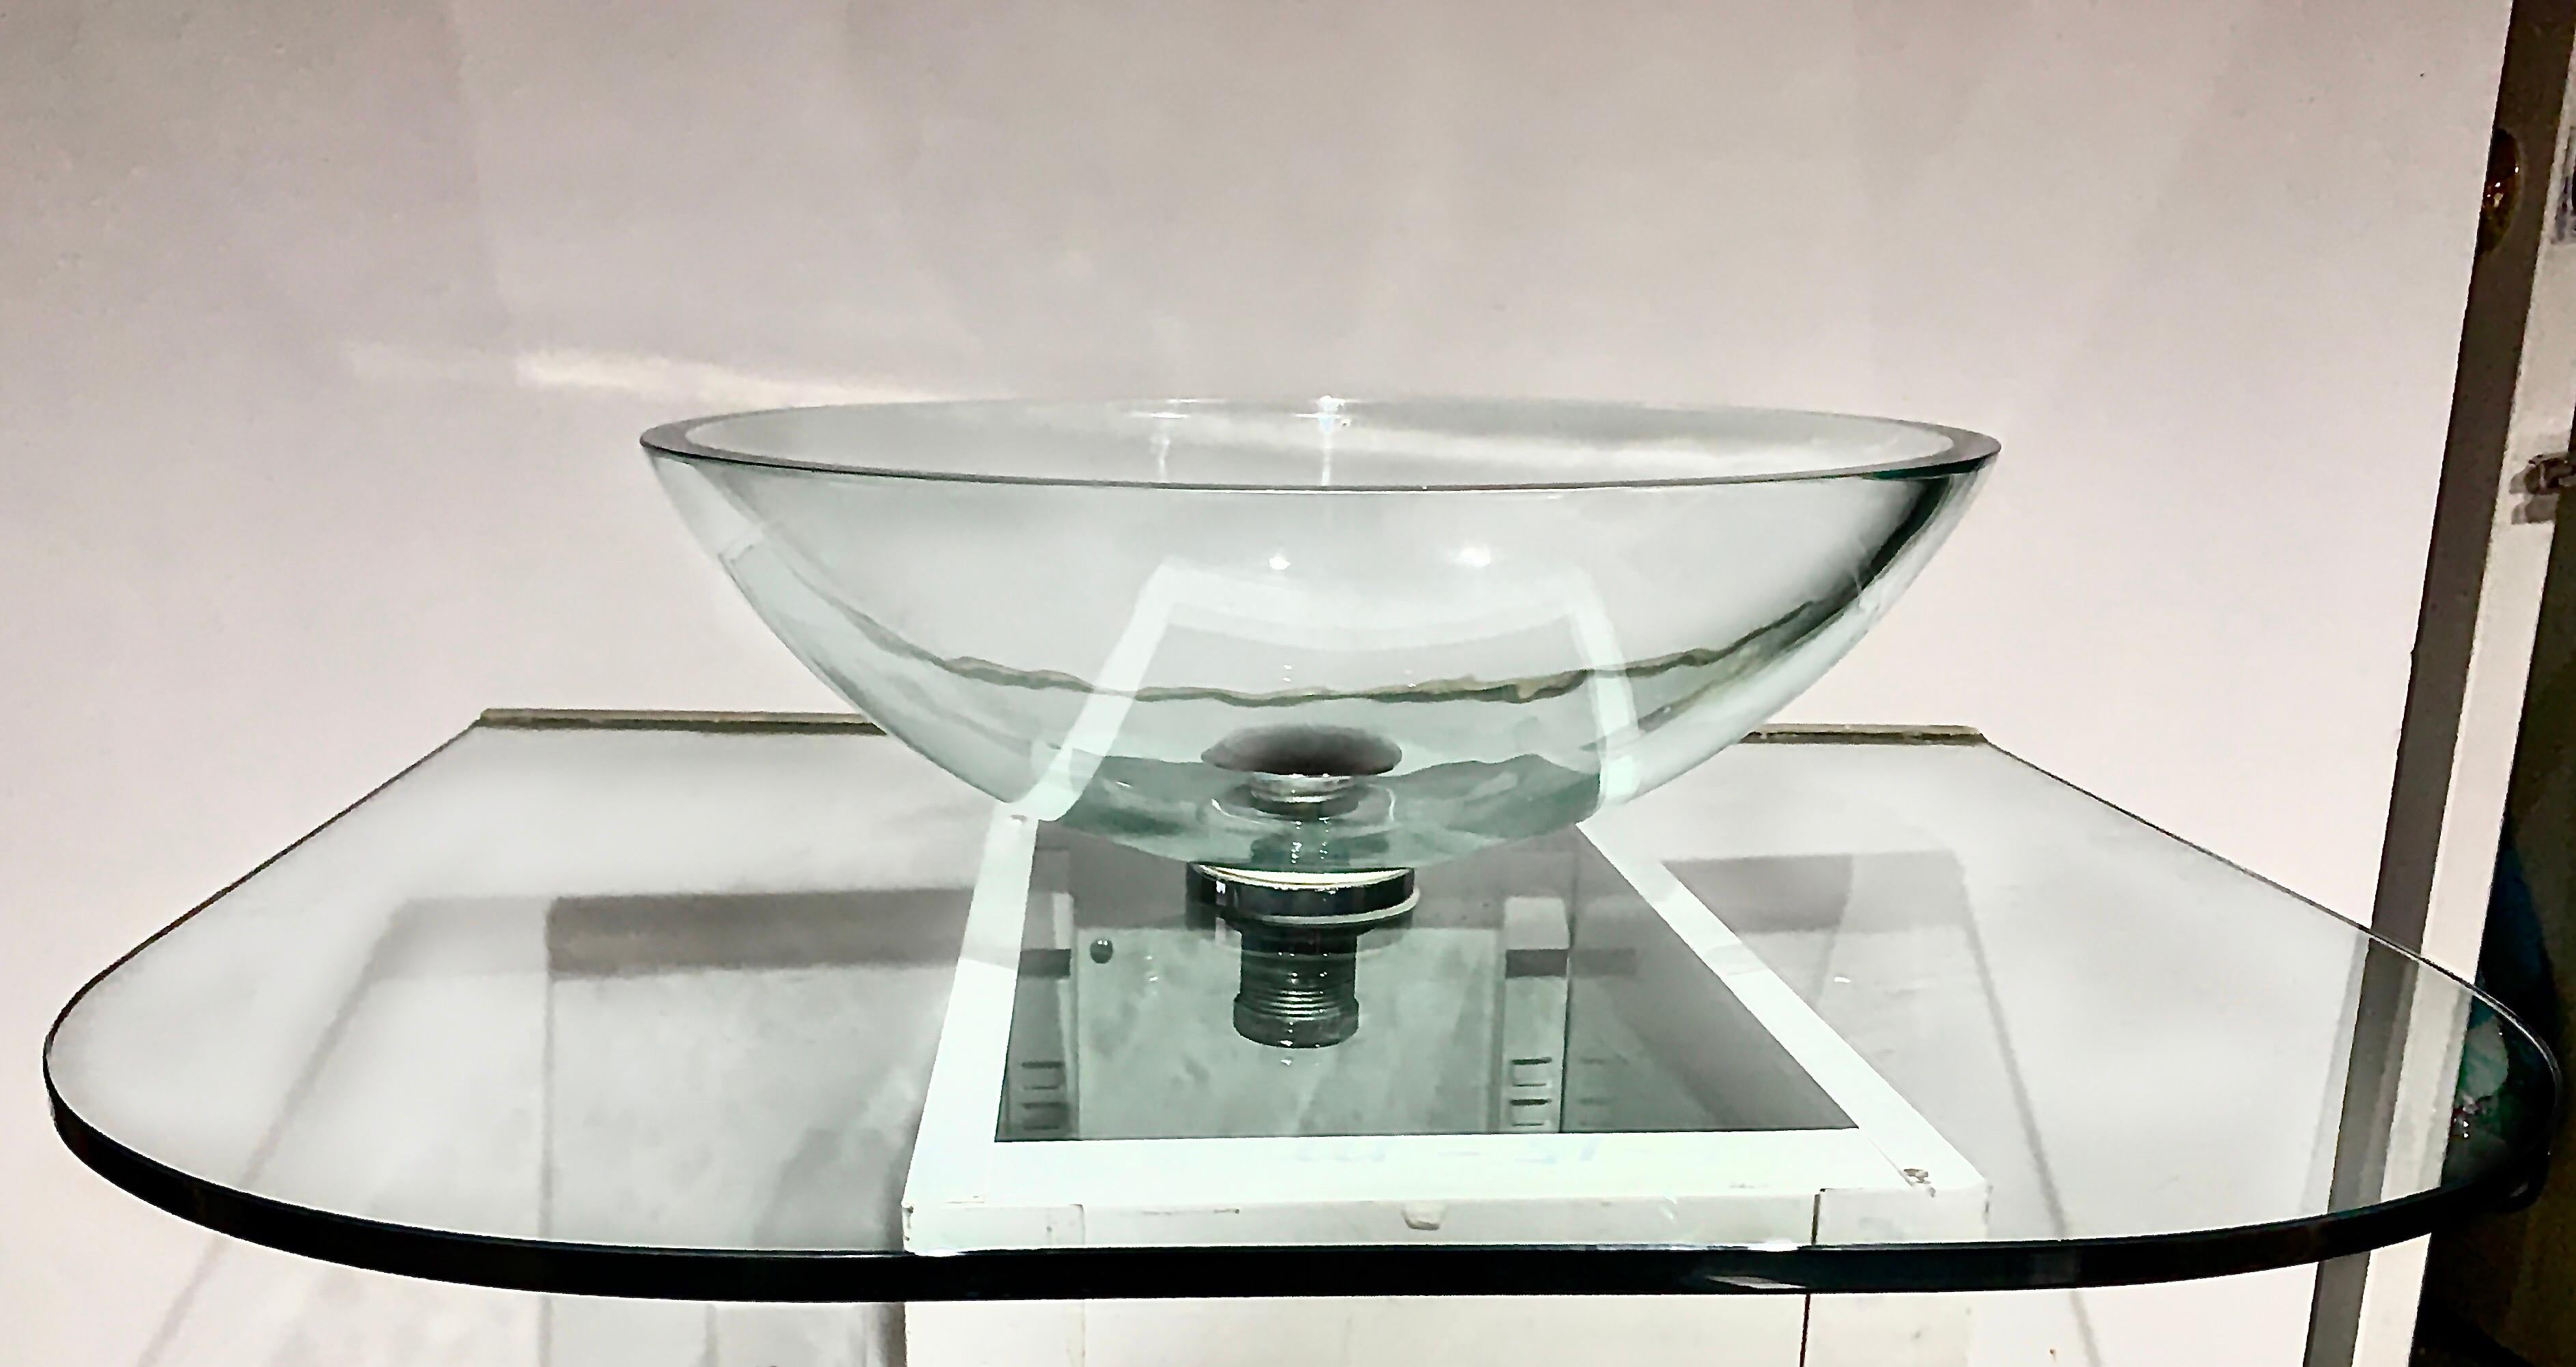 Vitraform large round polished clear vessel sink & rounded clear glass countertop. MSRP for this set is nearly 4400 USD.